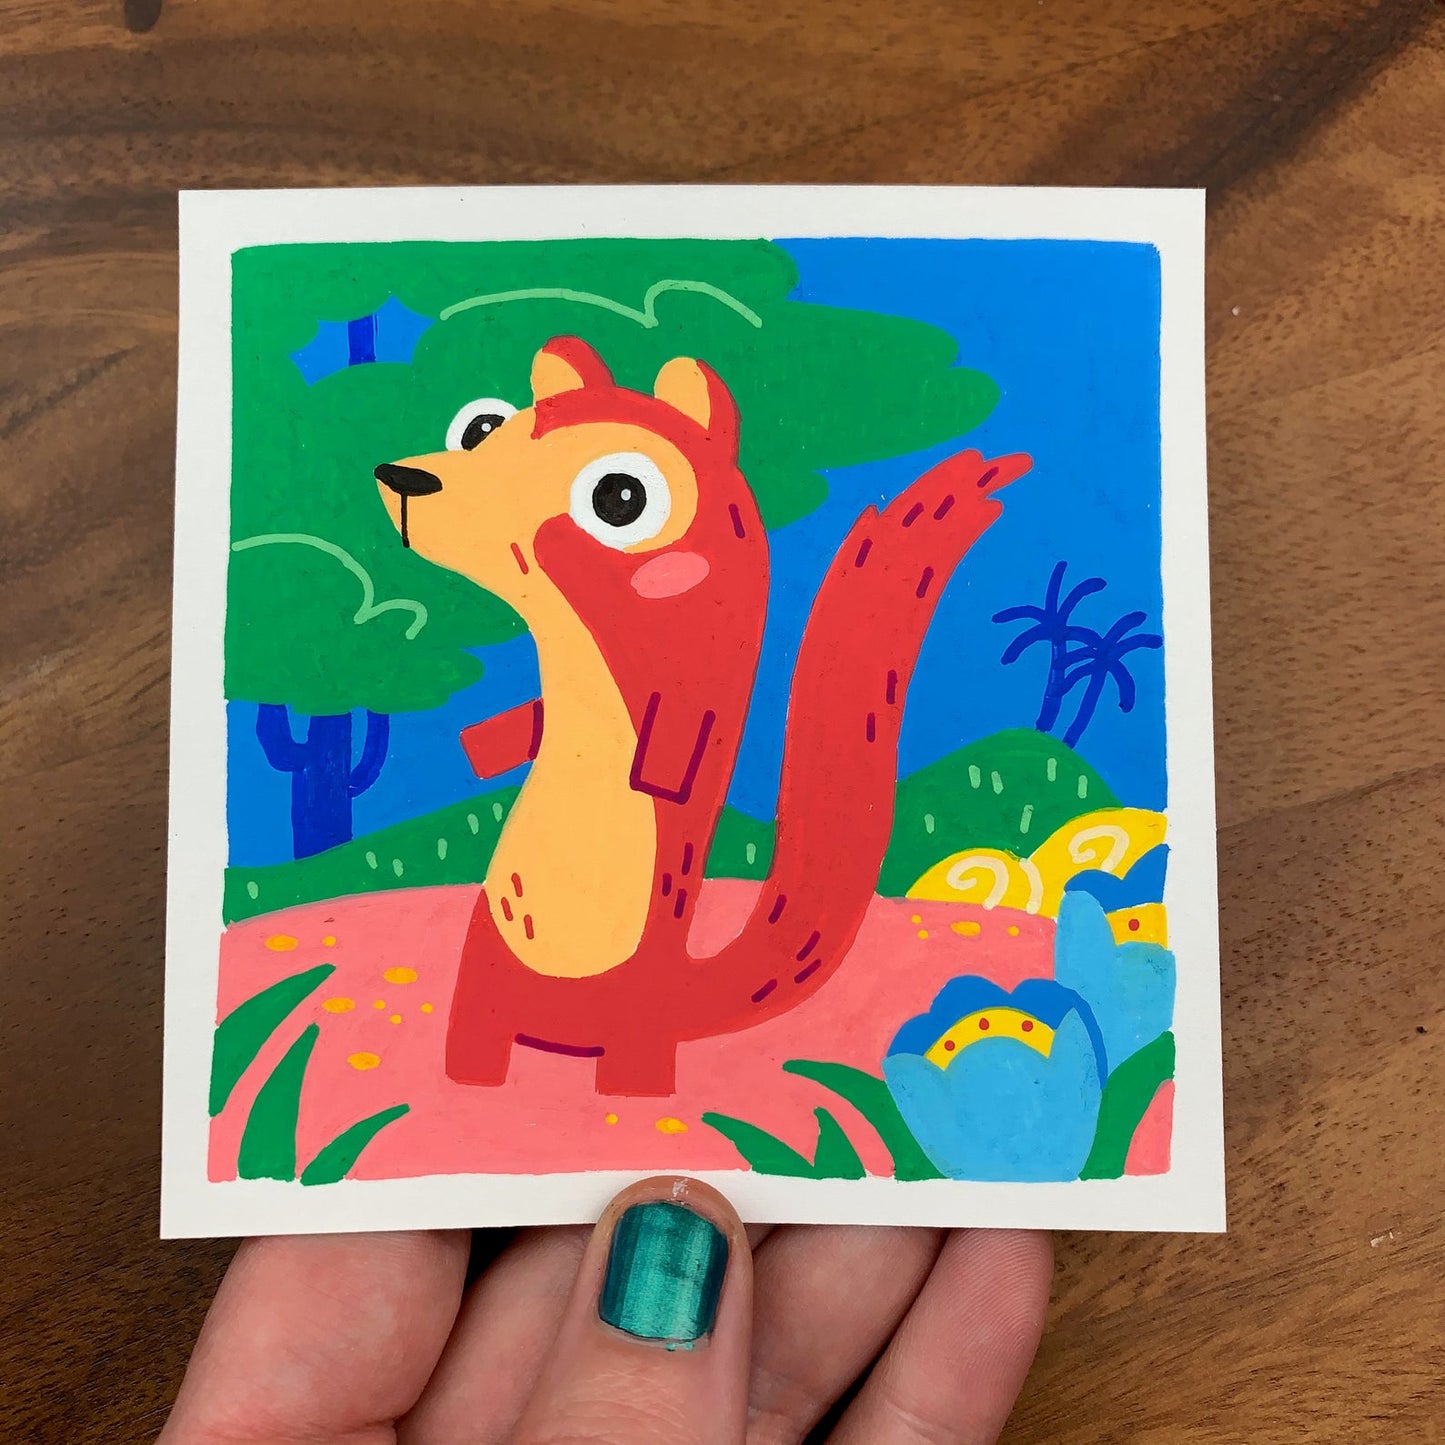 Original artwork of a cute red mongoose in a lush colorful garden. Materials used: Uni-Posca paint markers.